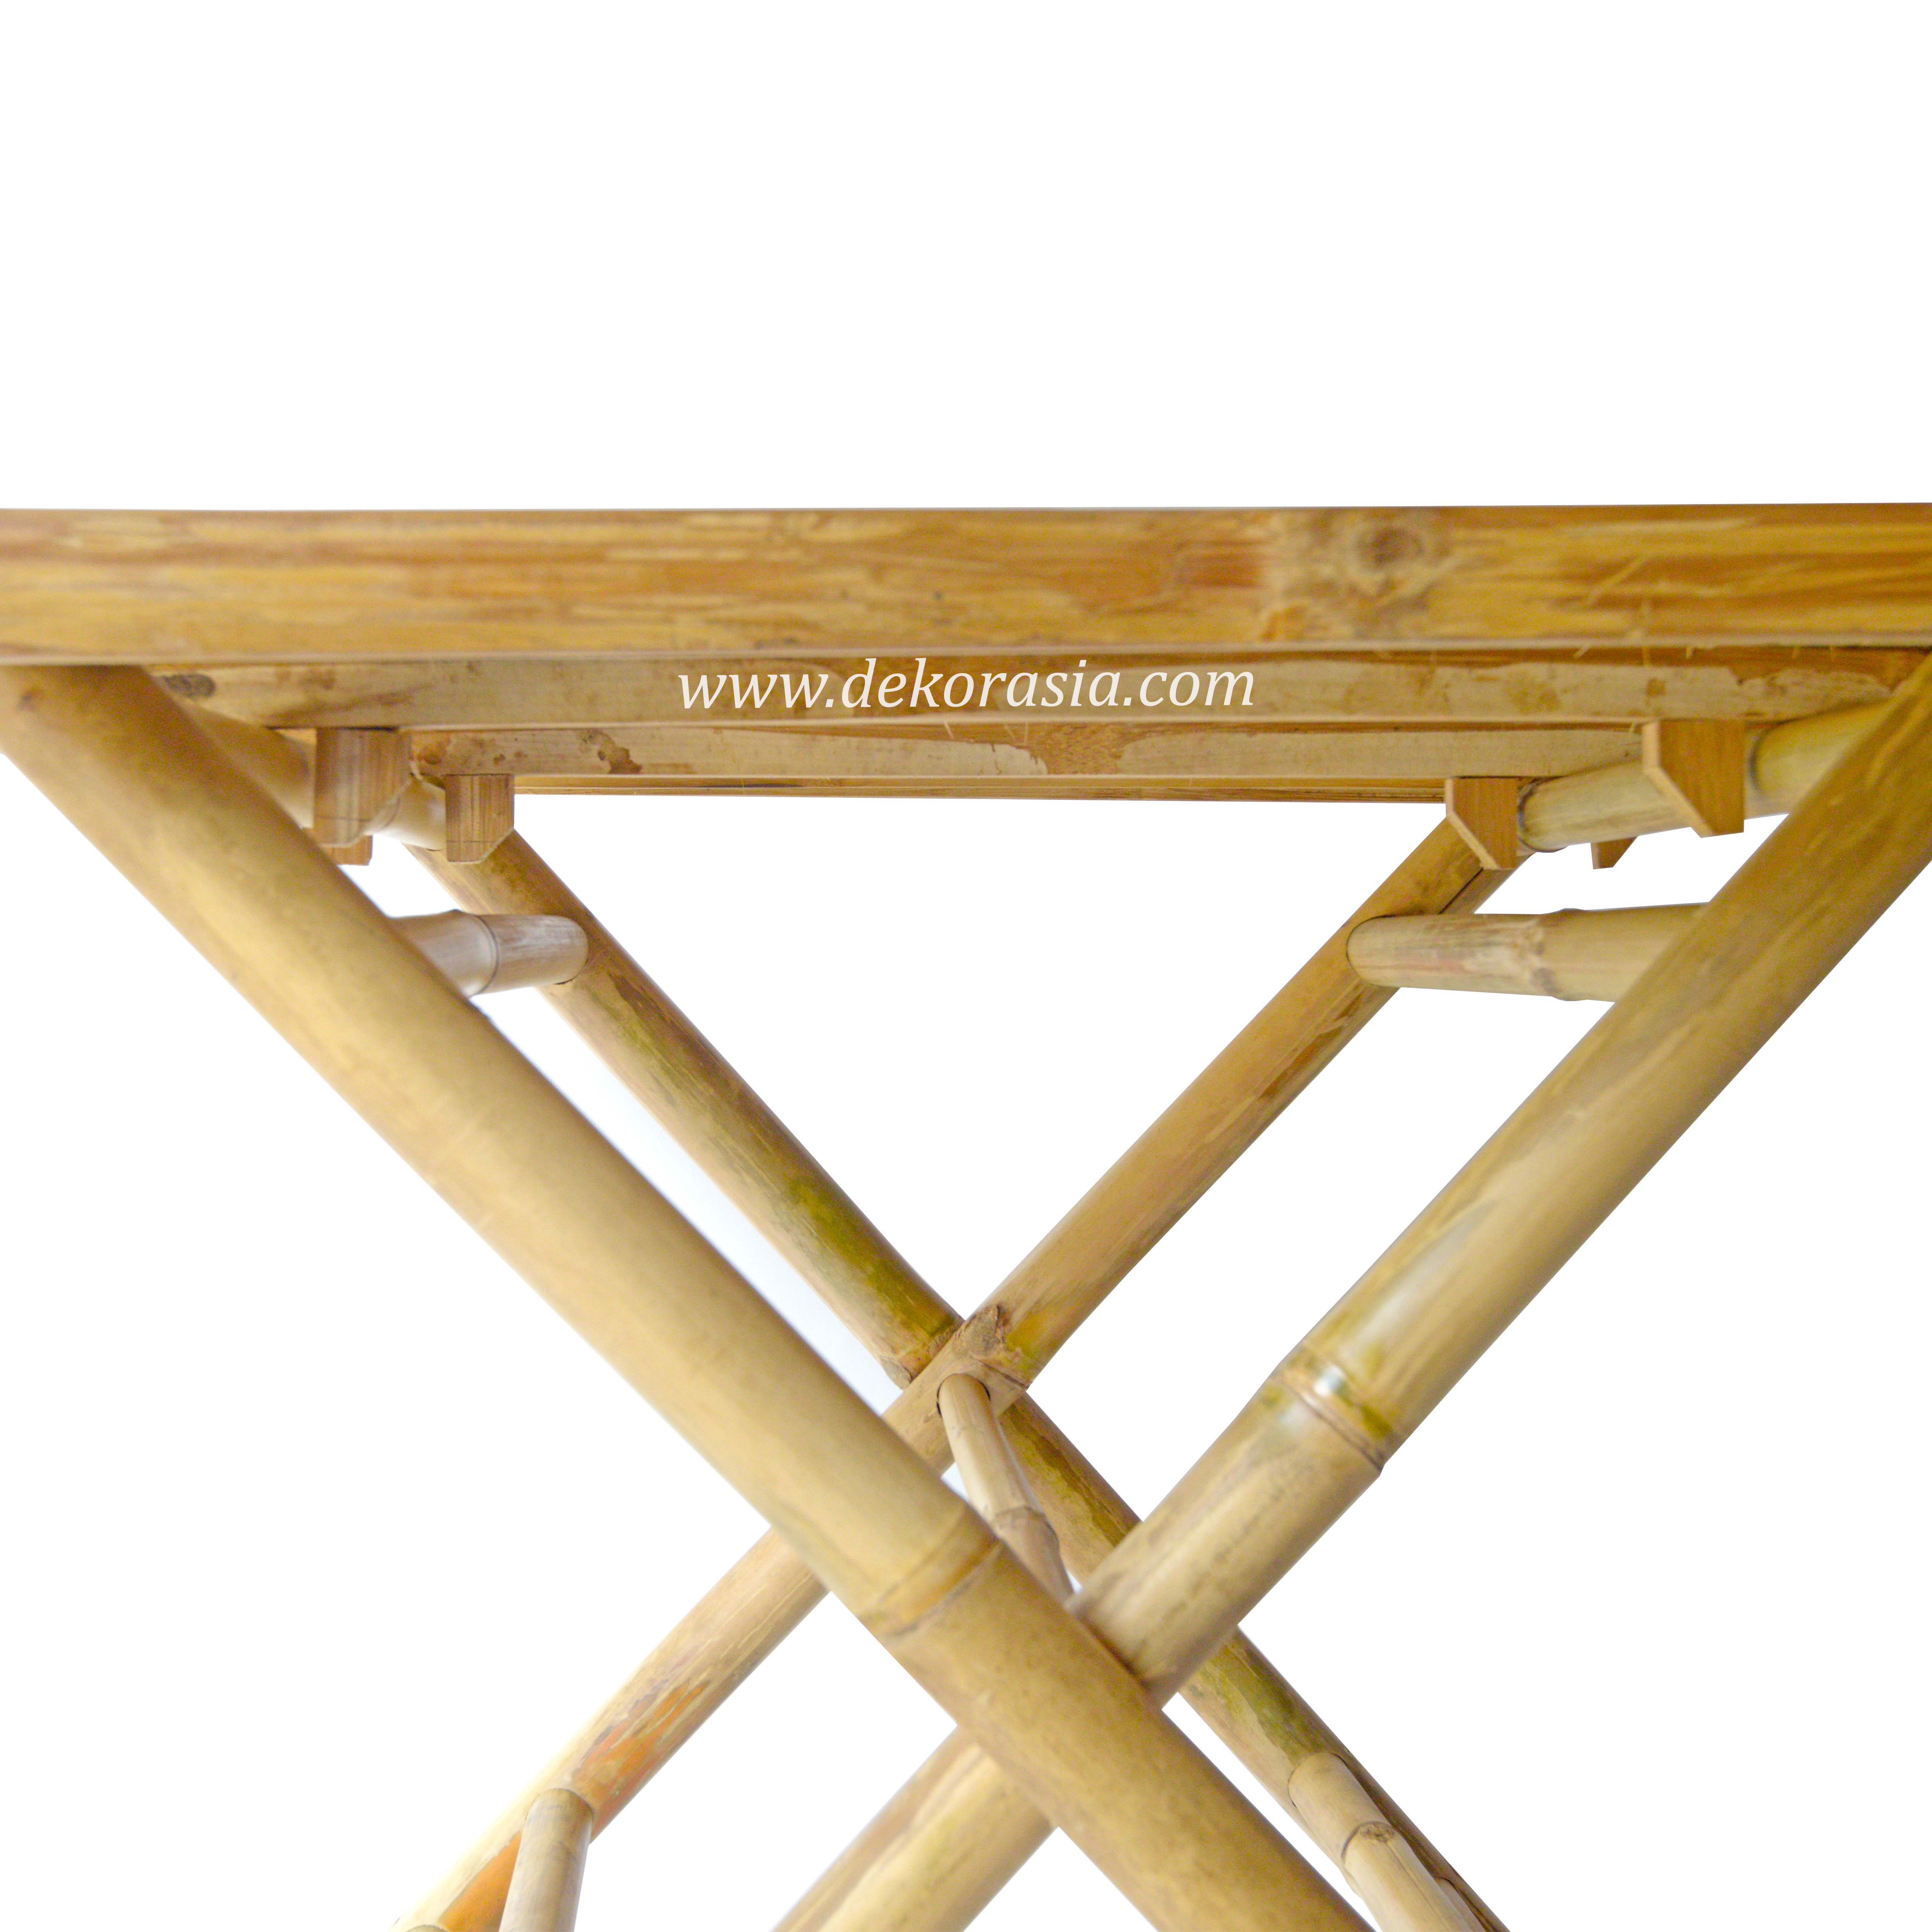 Square Bamboo Table Crossed Legs, Bamboo Knockdown - Bamboo Furniture